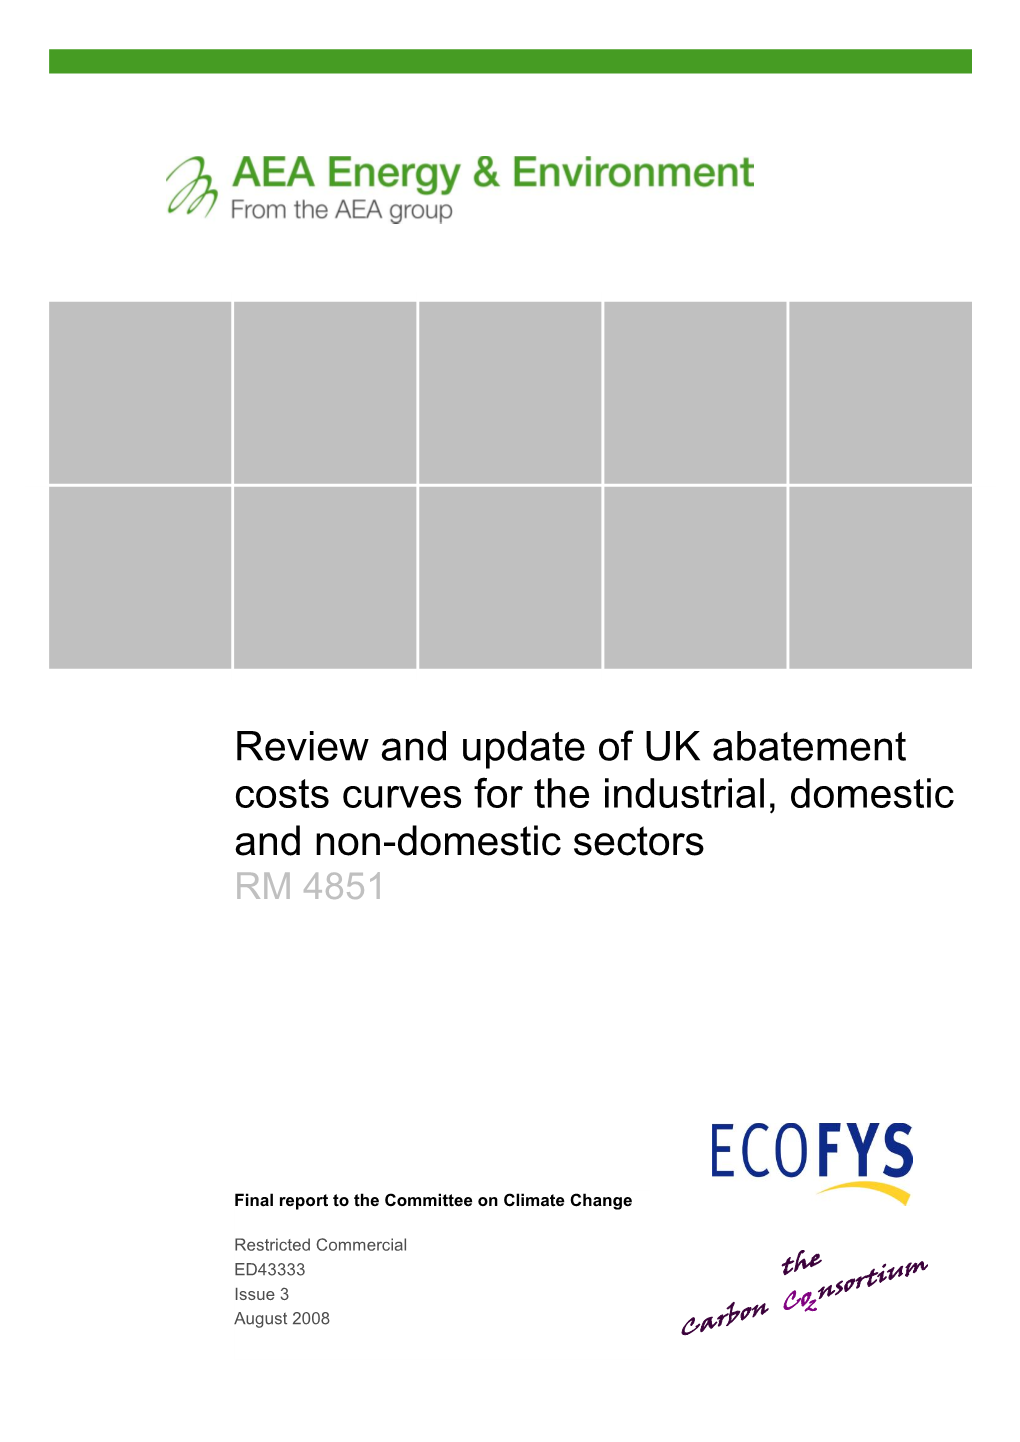 Review and Update of UK Abatement Cost Curves for the Industrial